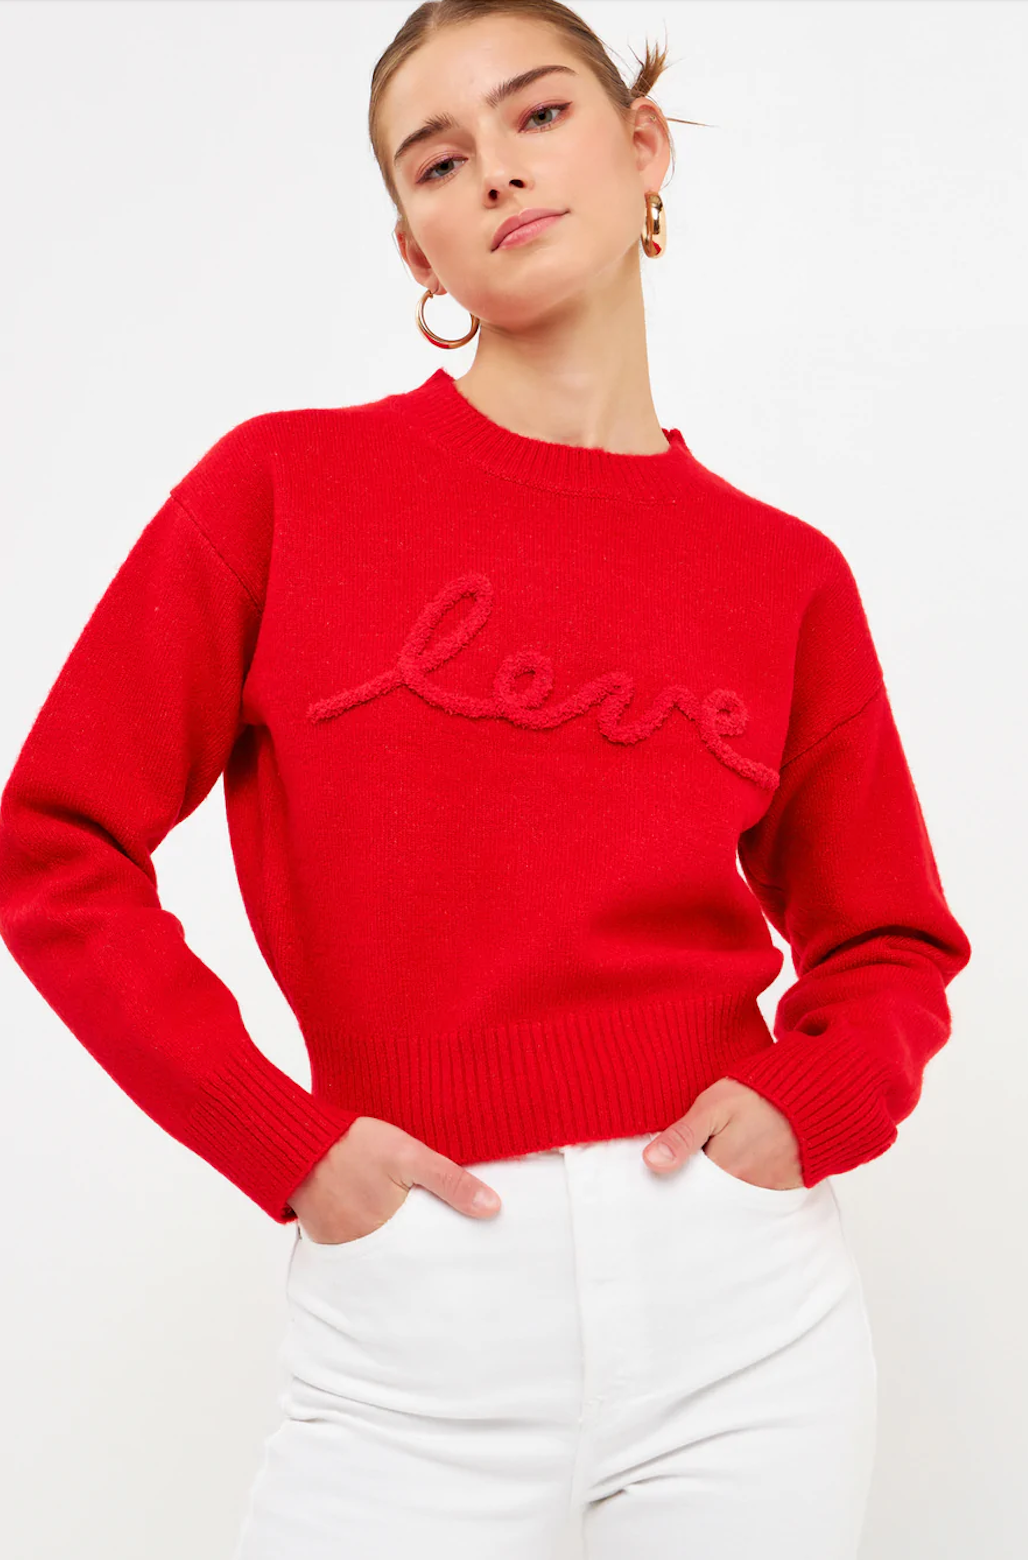 LEXI LOVE CHENILLE  EMBROIDERED PLUSH SWEATER  IN RED